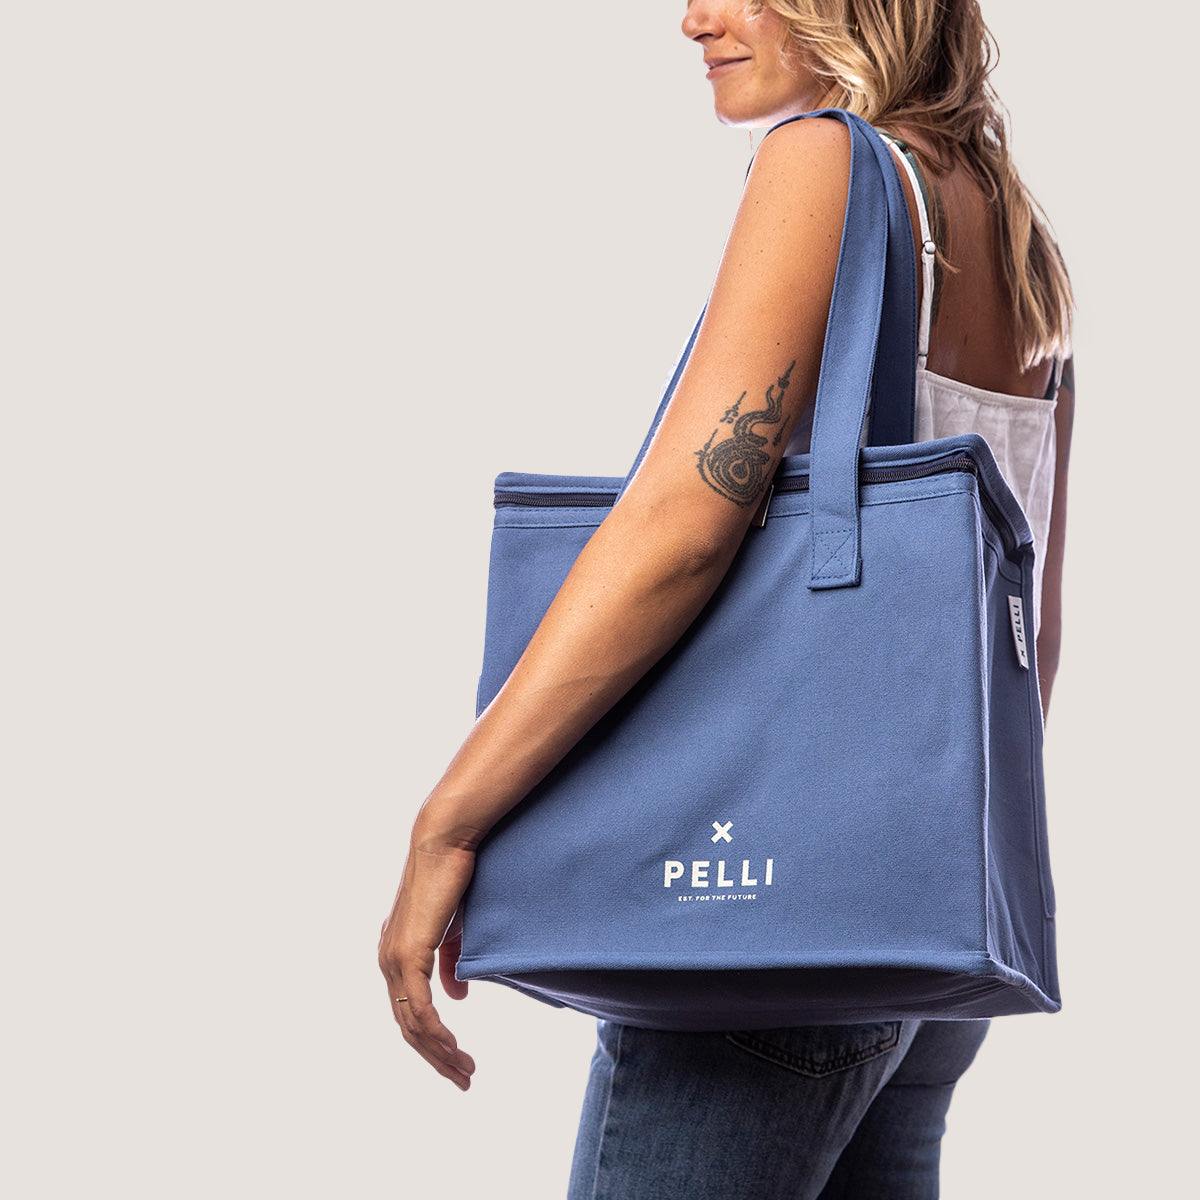 Load image into Gallery viewer, A woman carrying a canvas medium cooler bag in ocean blue on her shoulder
